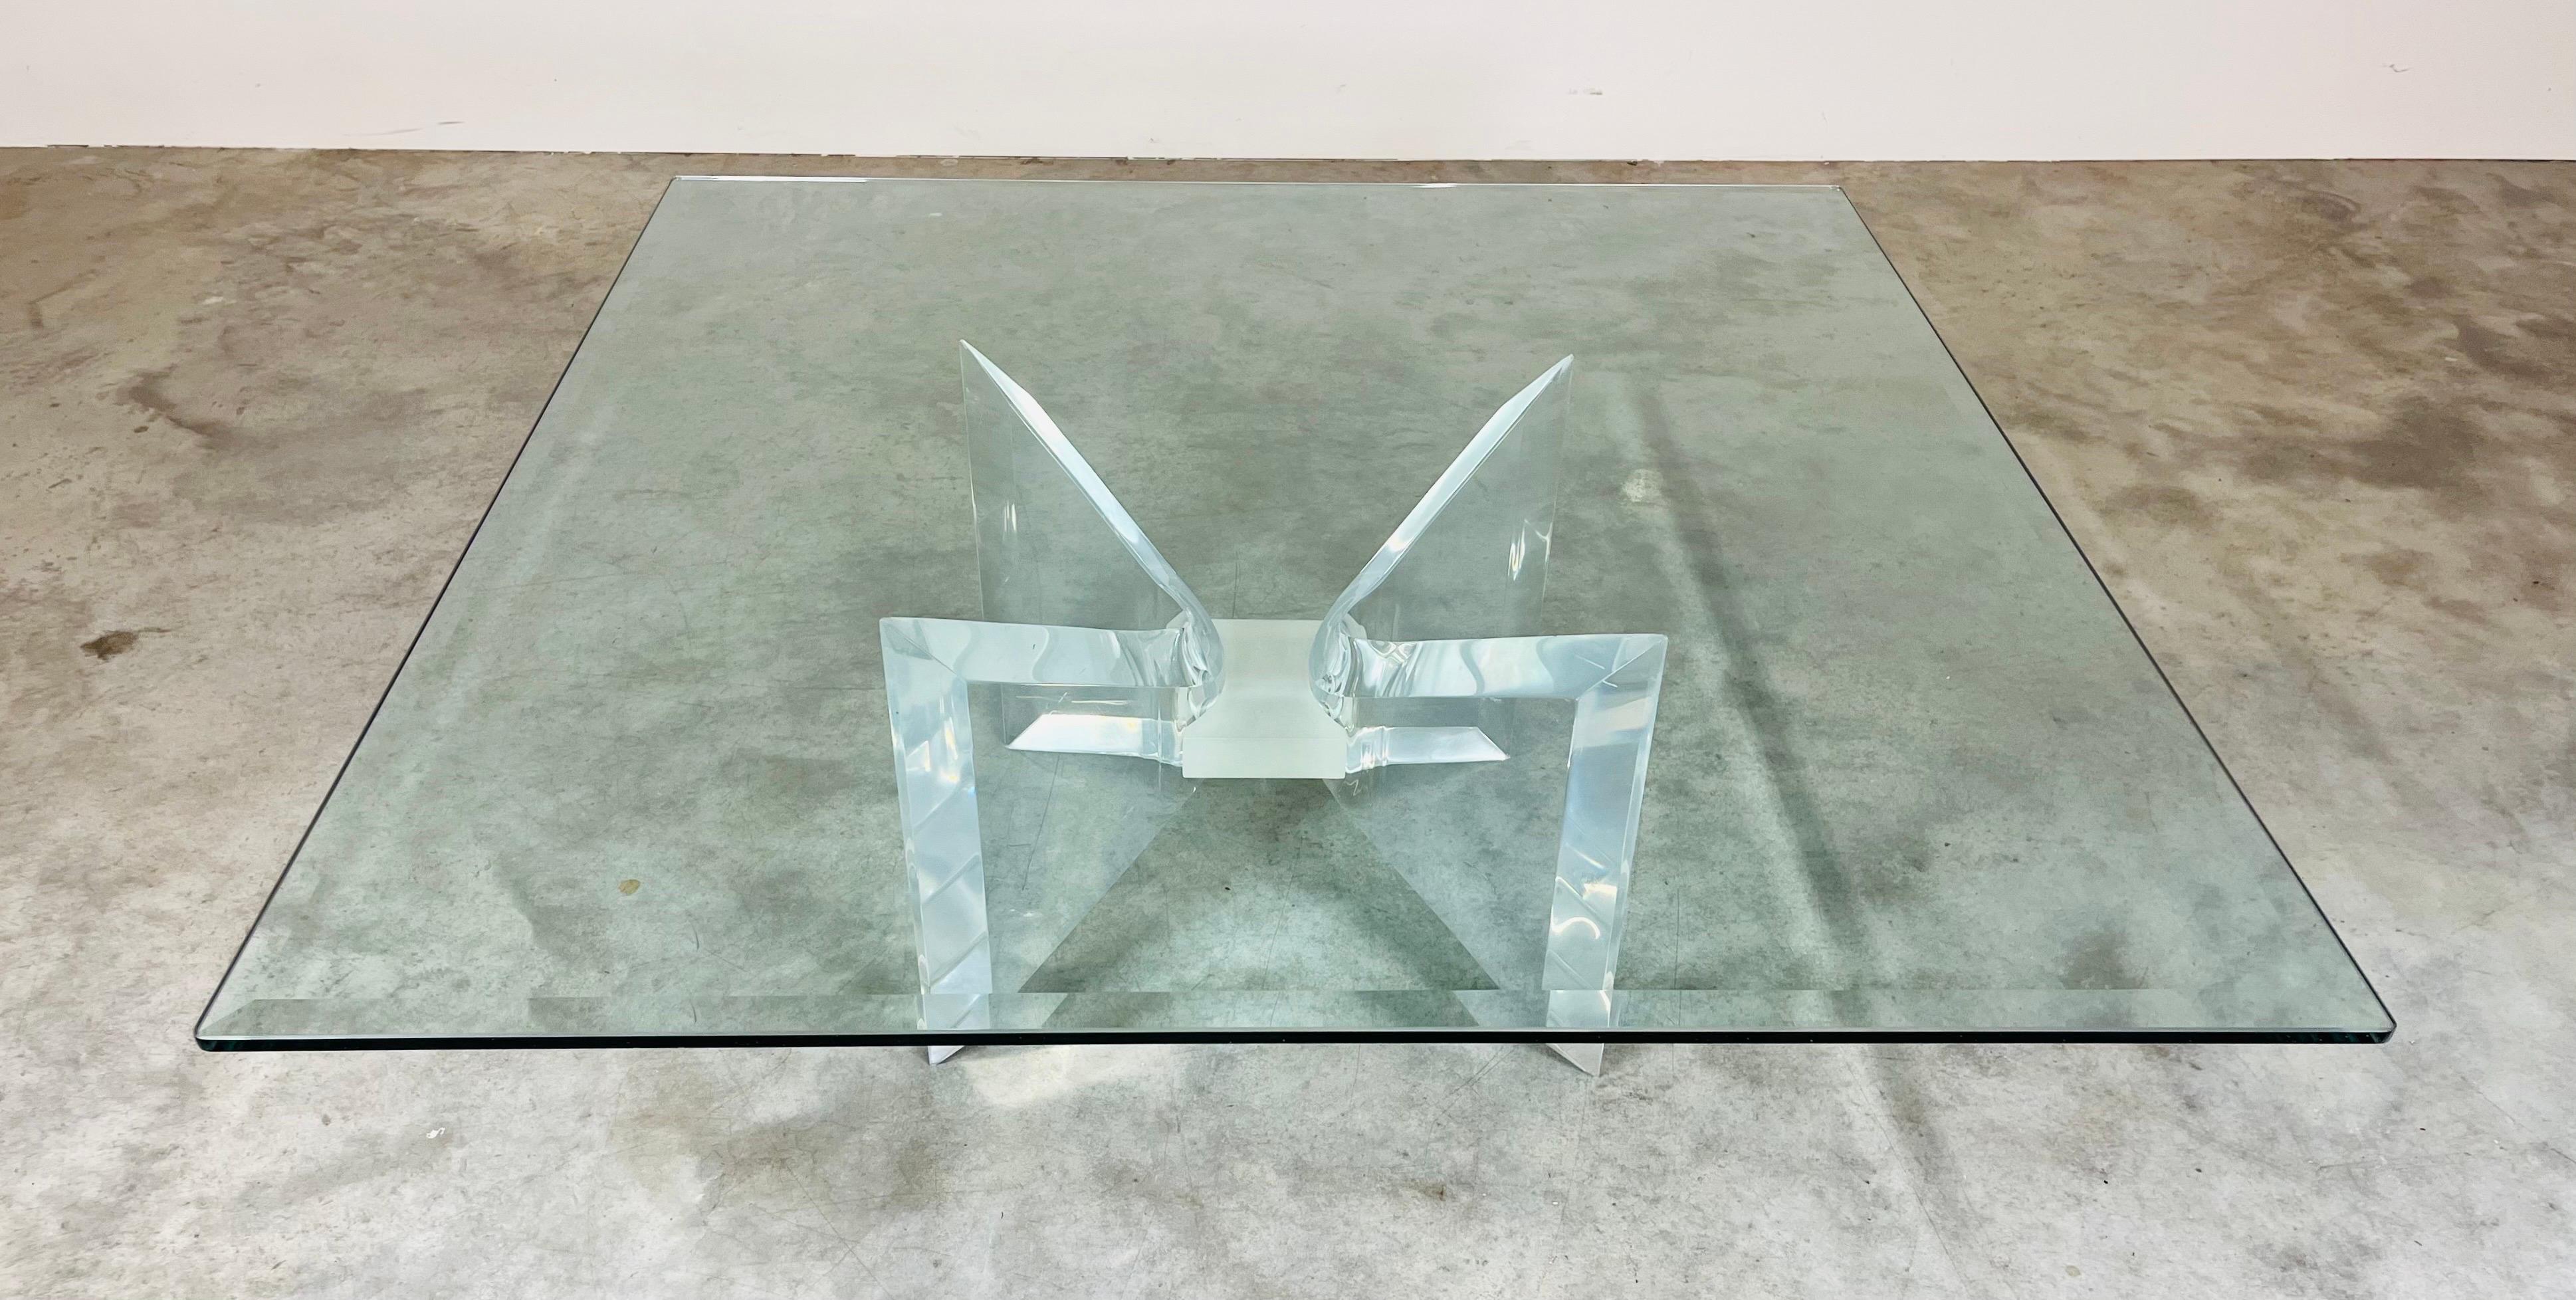 A beautiful lucite “Butterfly” cocktail table designed by Charles Hollis Jones having rare frosted center with sculptural lucite butterfly wings underneath of a 41.75” x 41.75” tempered glass top having a 1” taper around the edges.
In fantastic